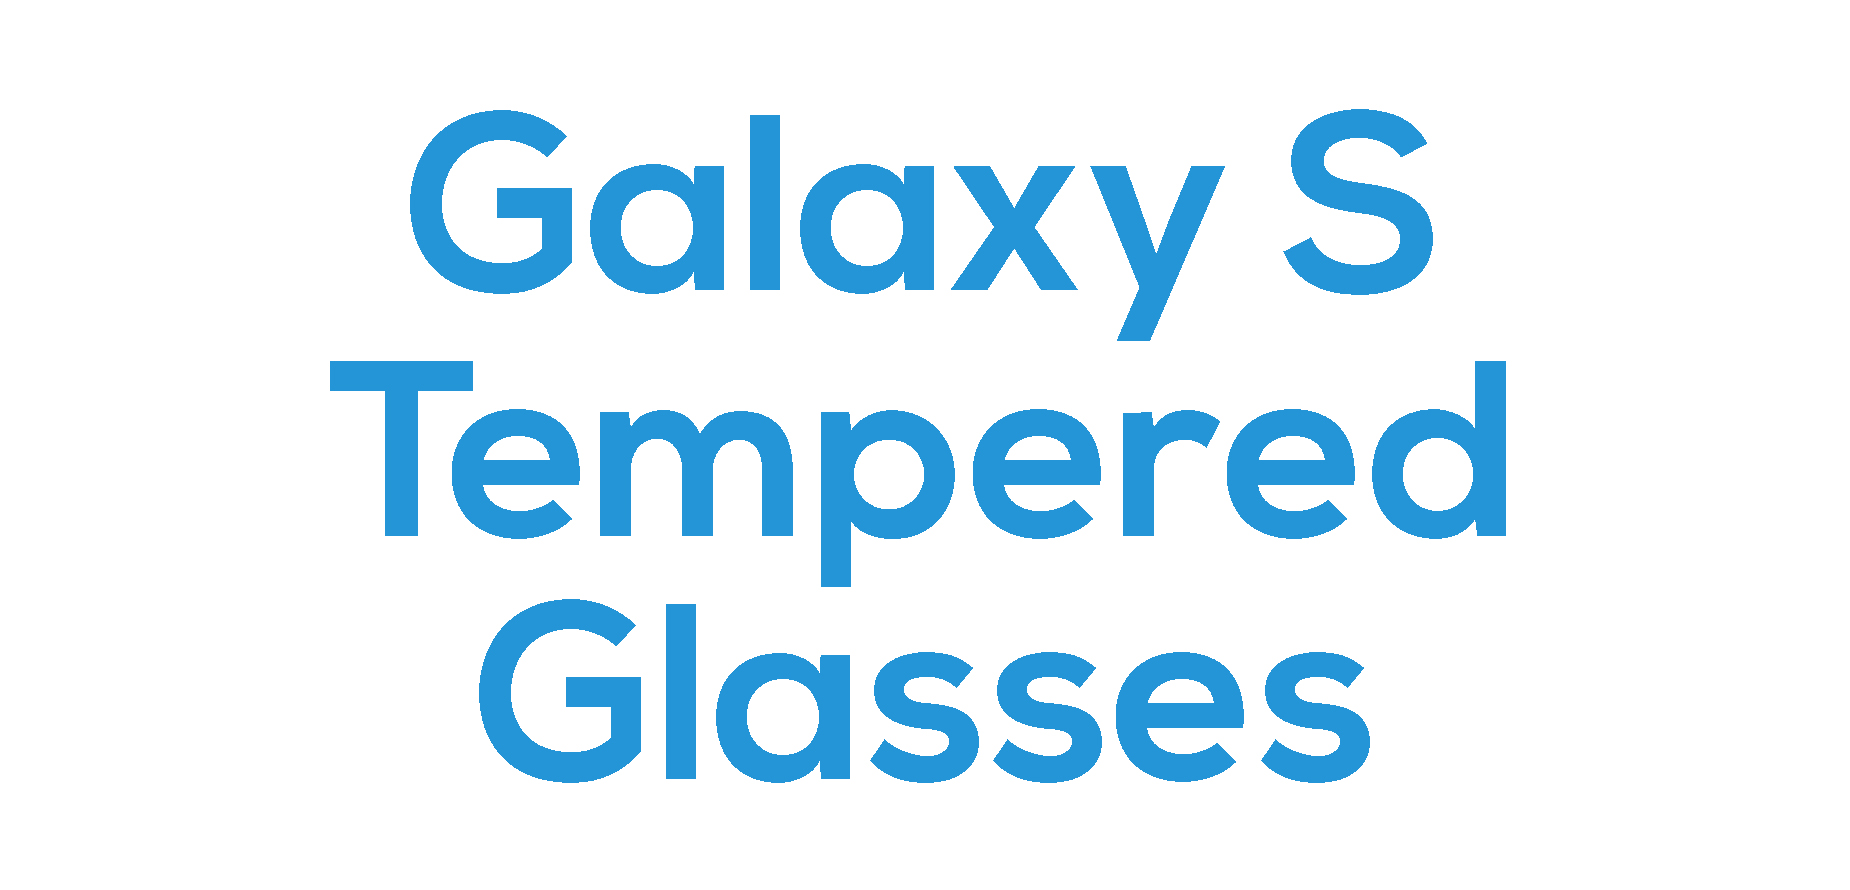 Galaxy S Tempered Glasses